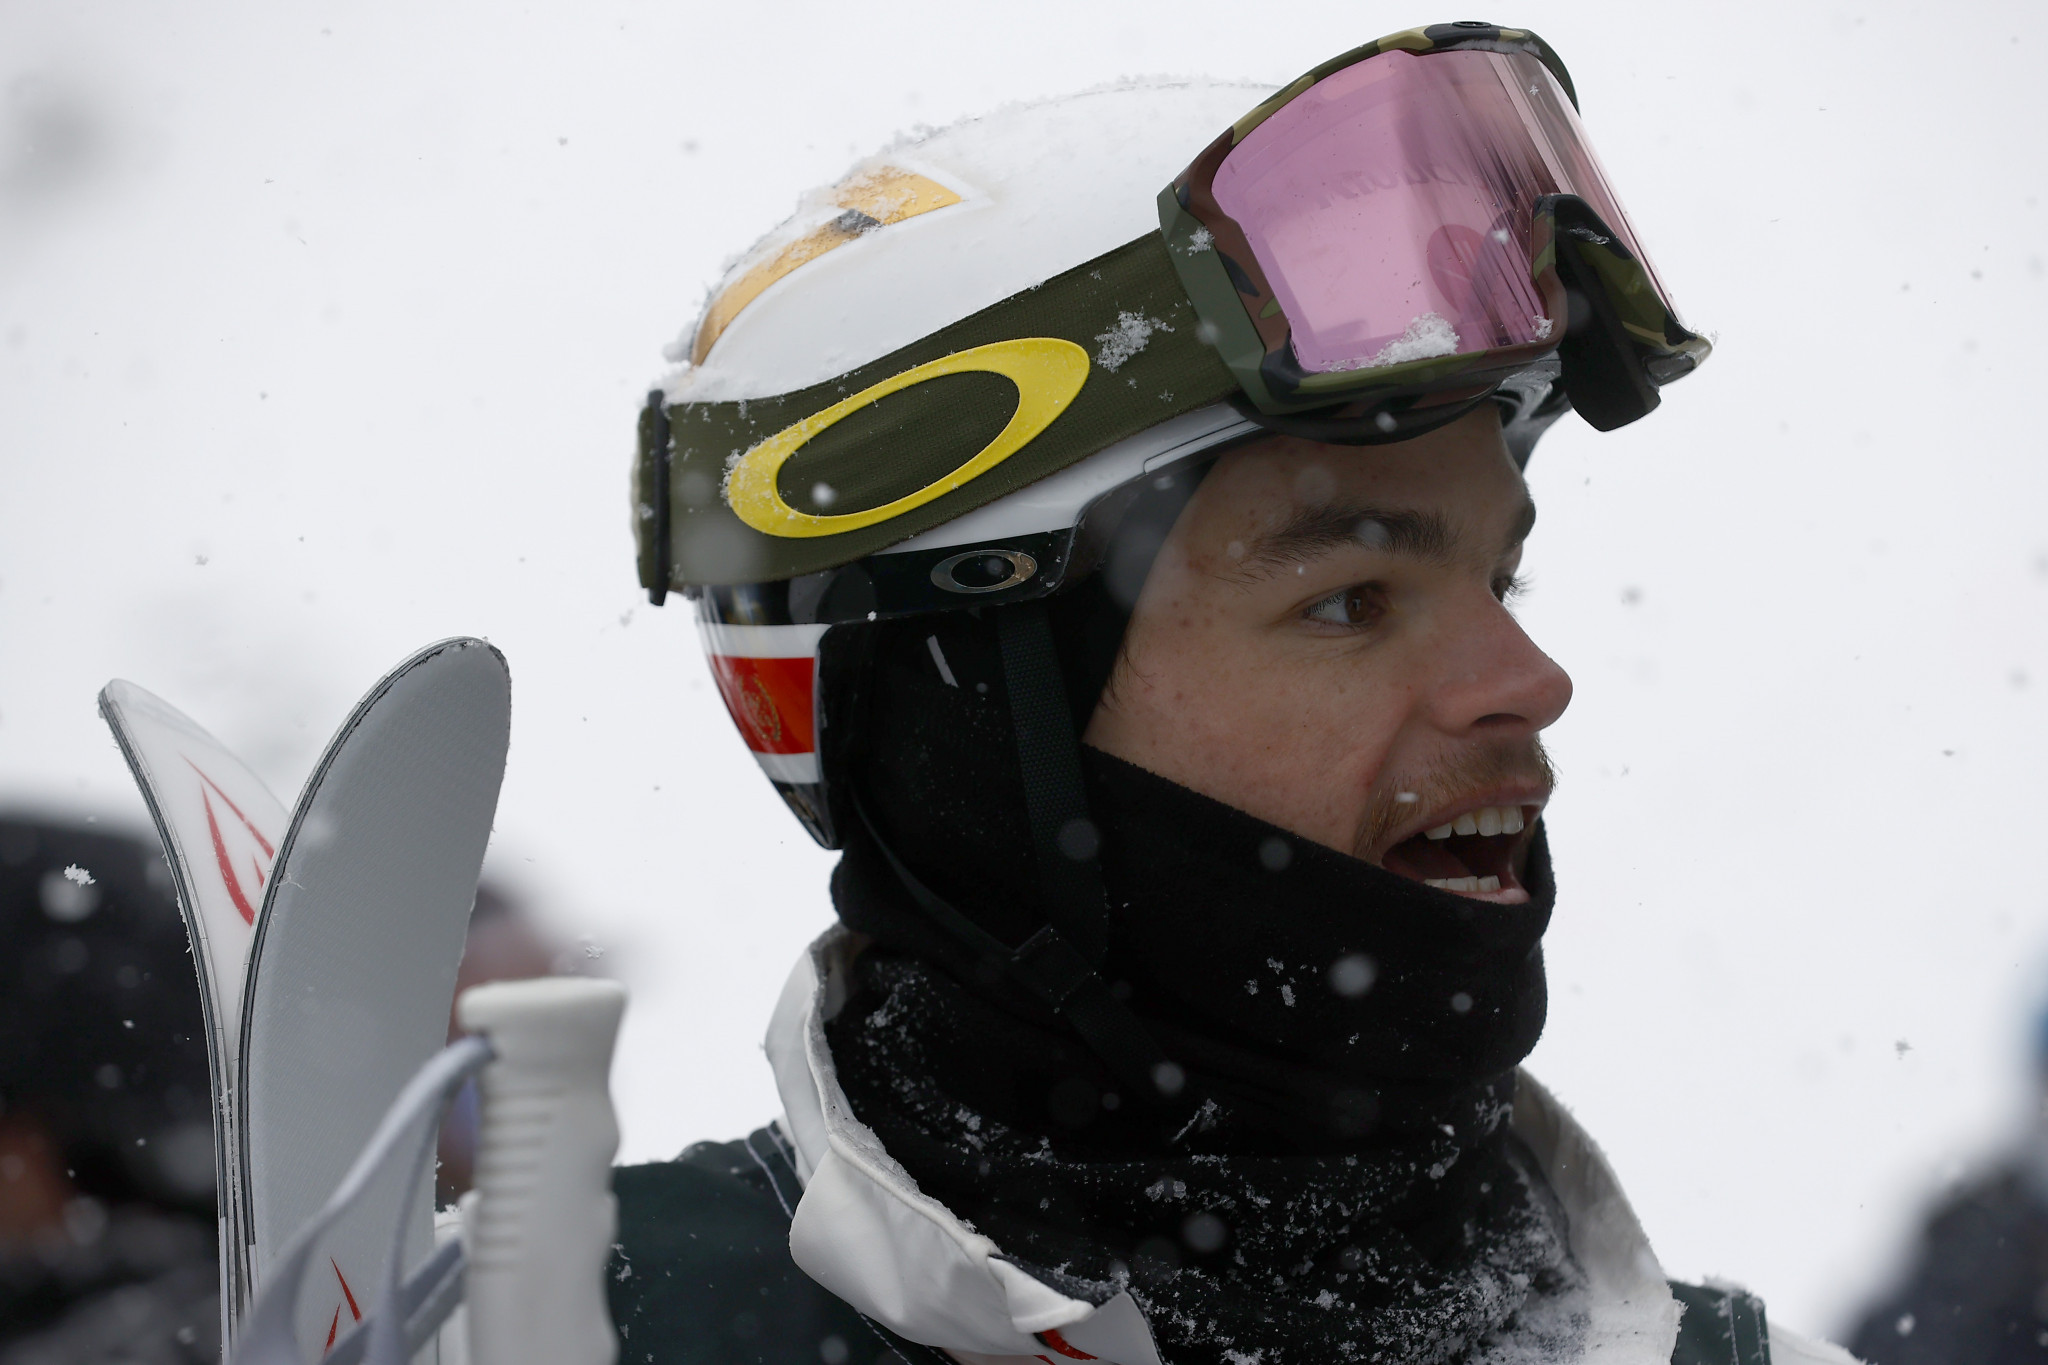 Kingsbury leads men's moguls qualification at Freestyle Ski World Cup in Alpe d'Huez